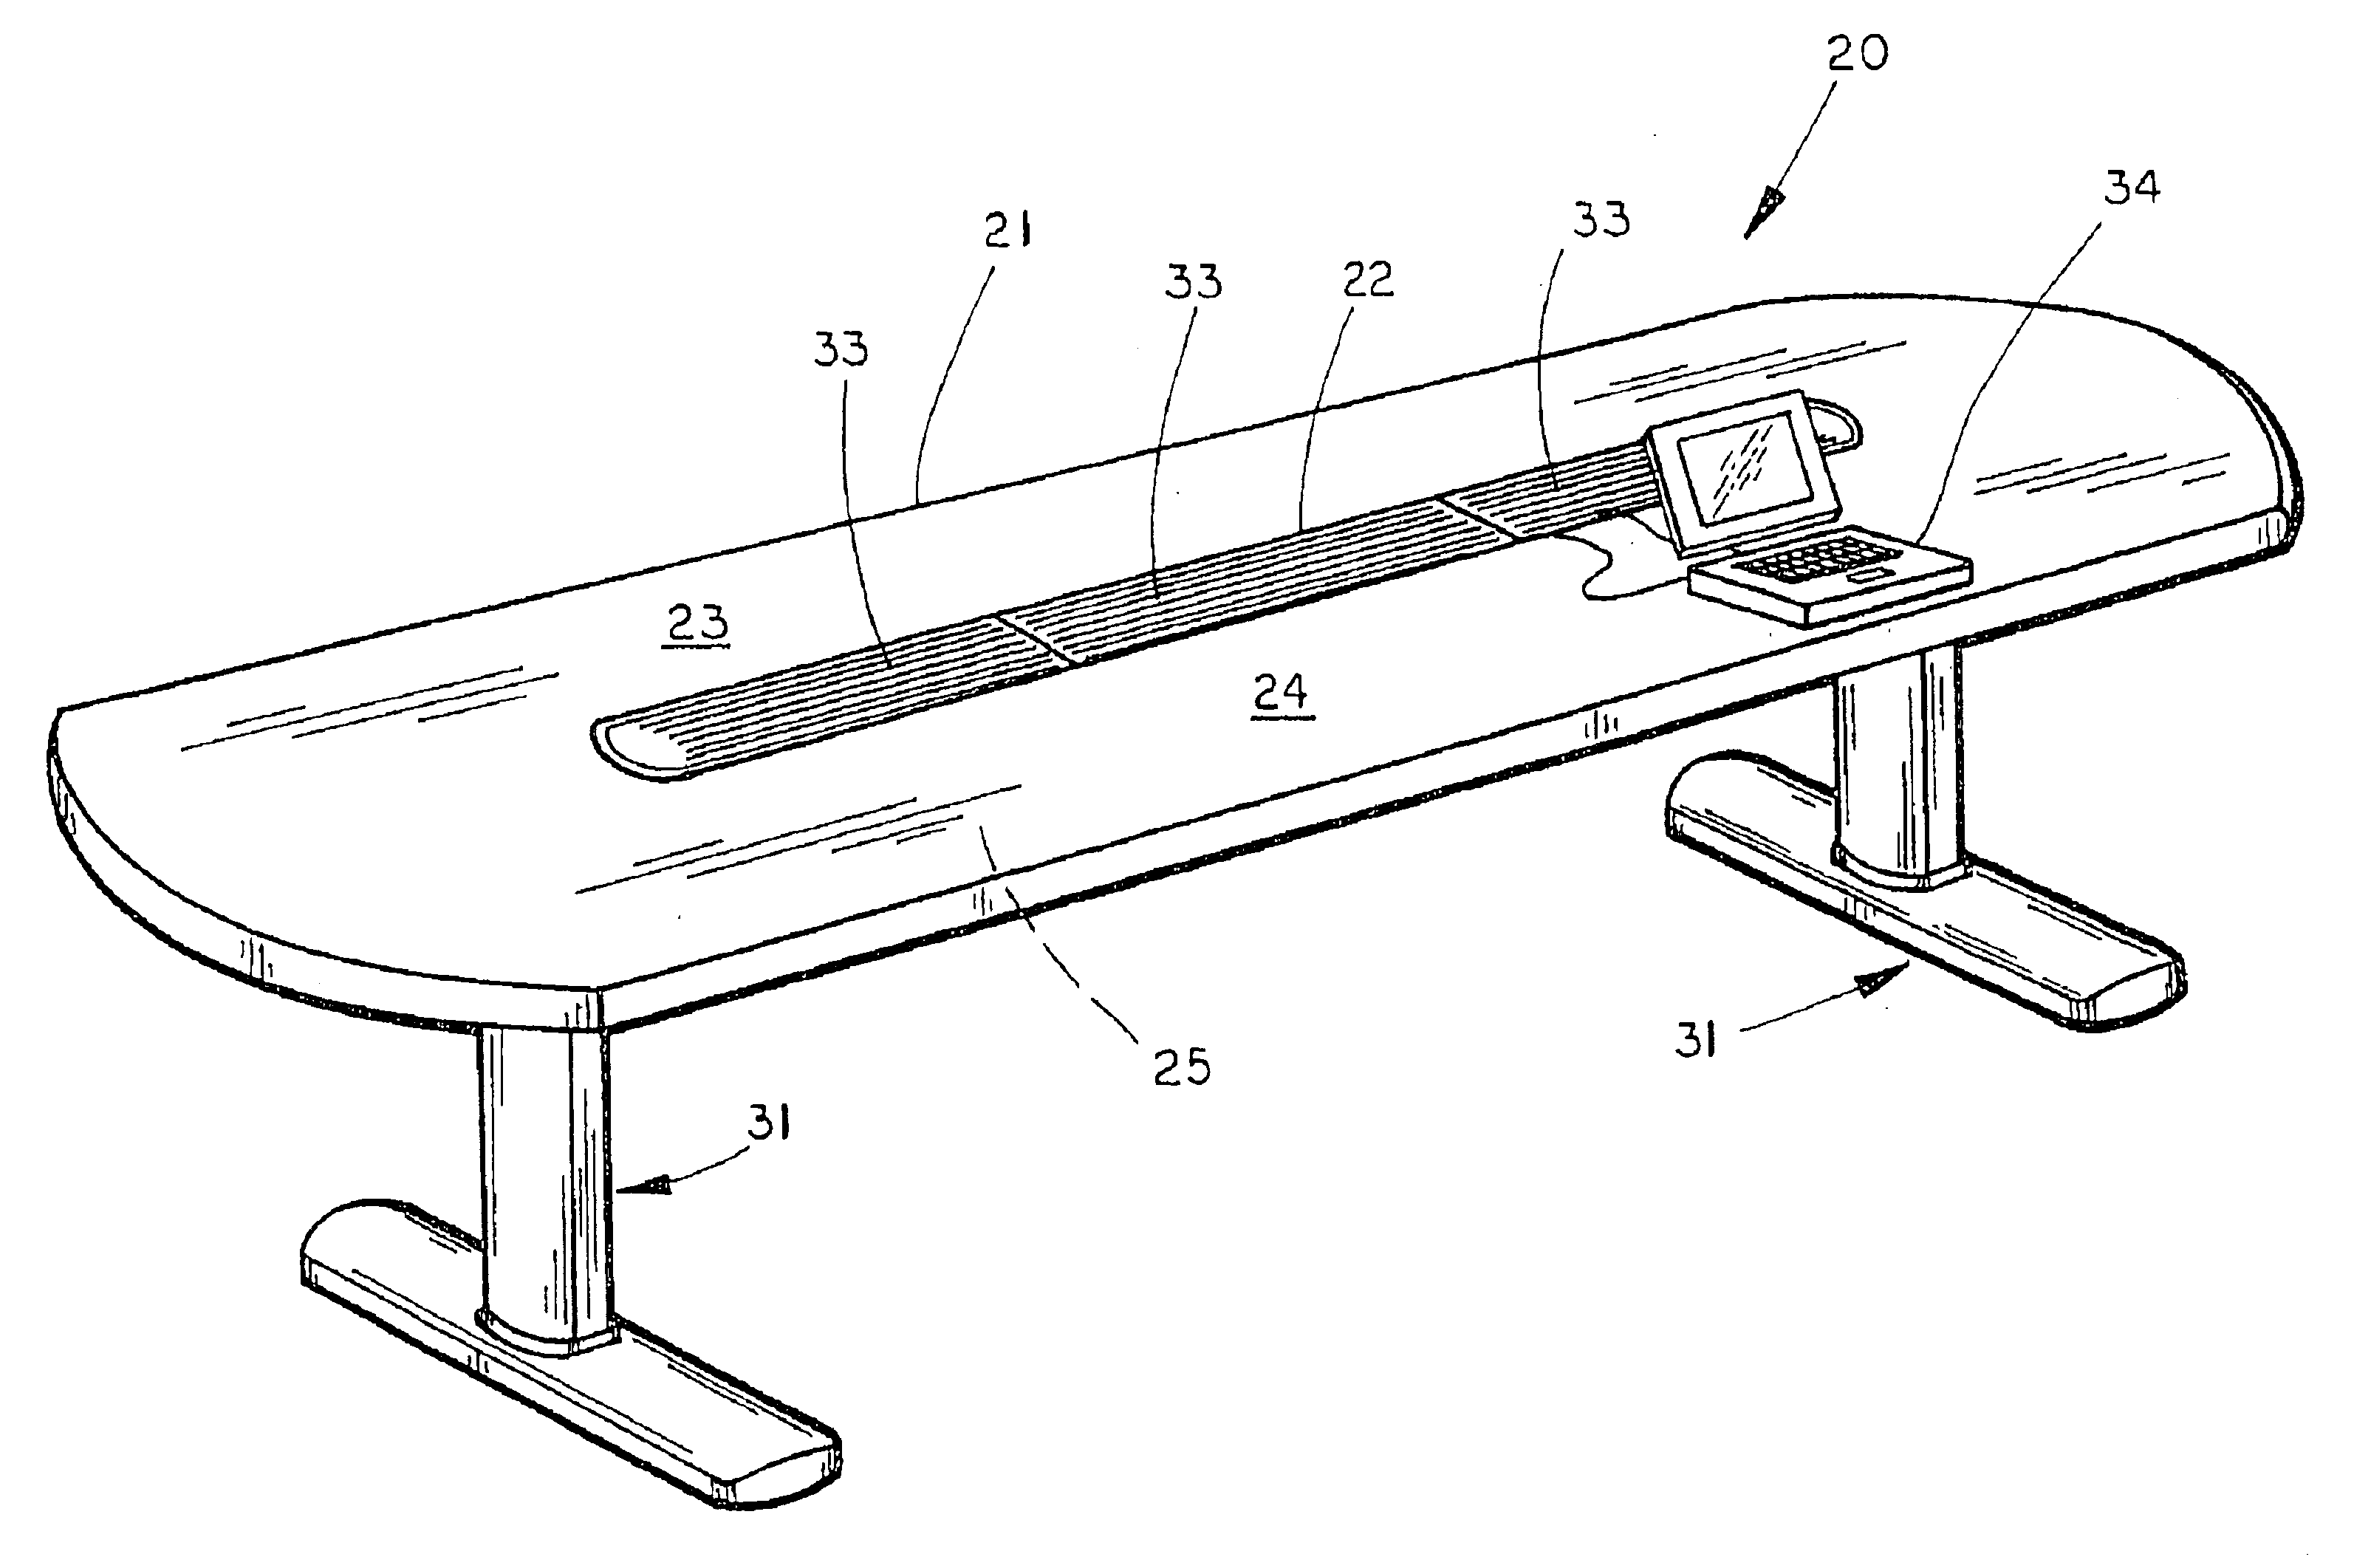 Table with two-way cover for utility access